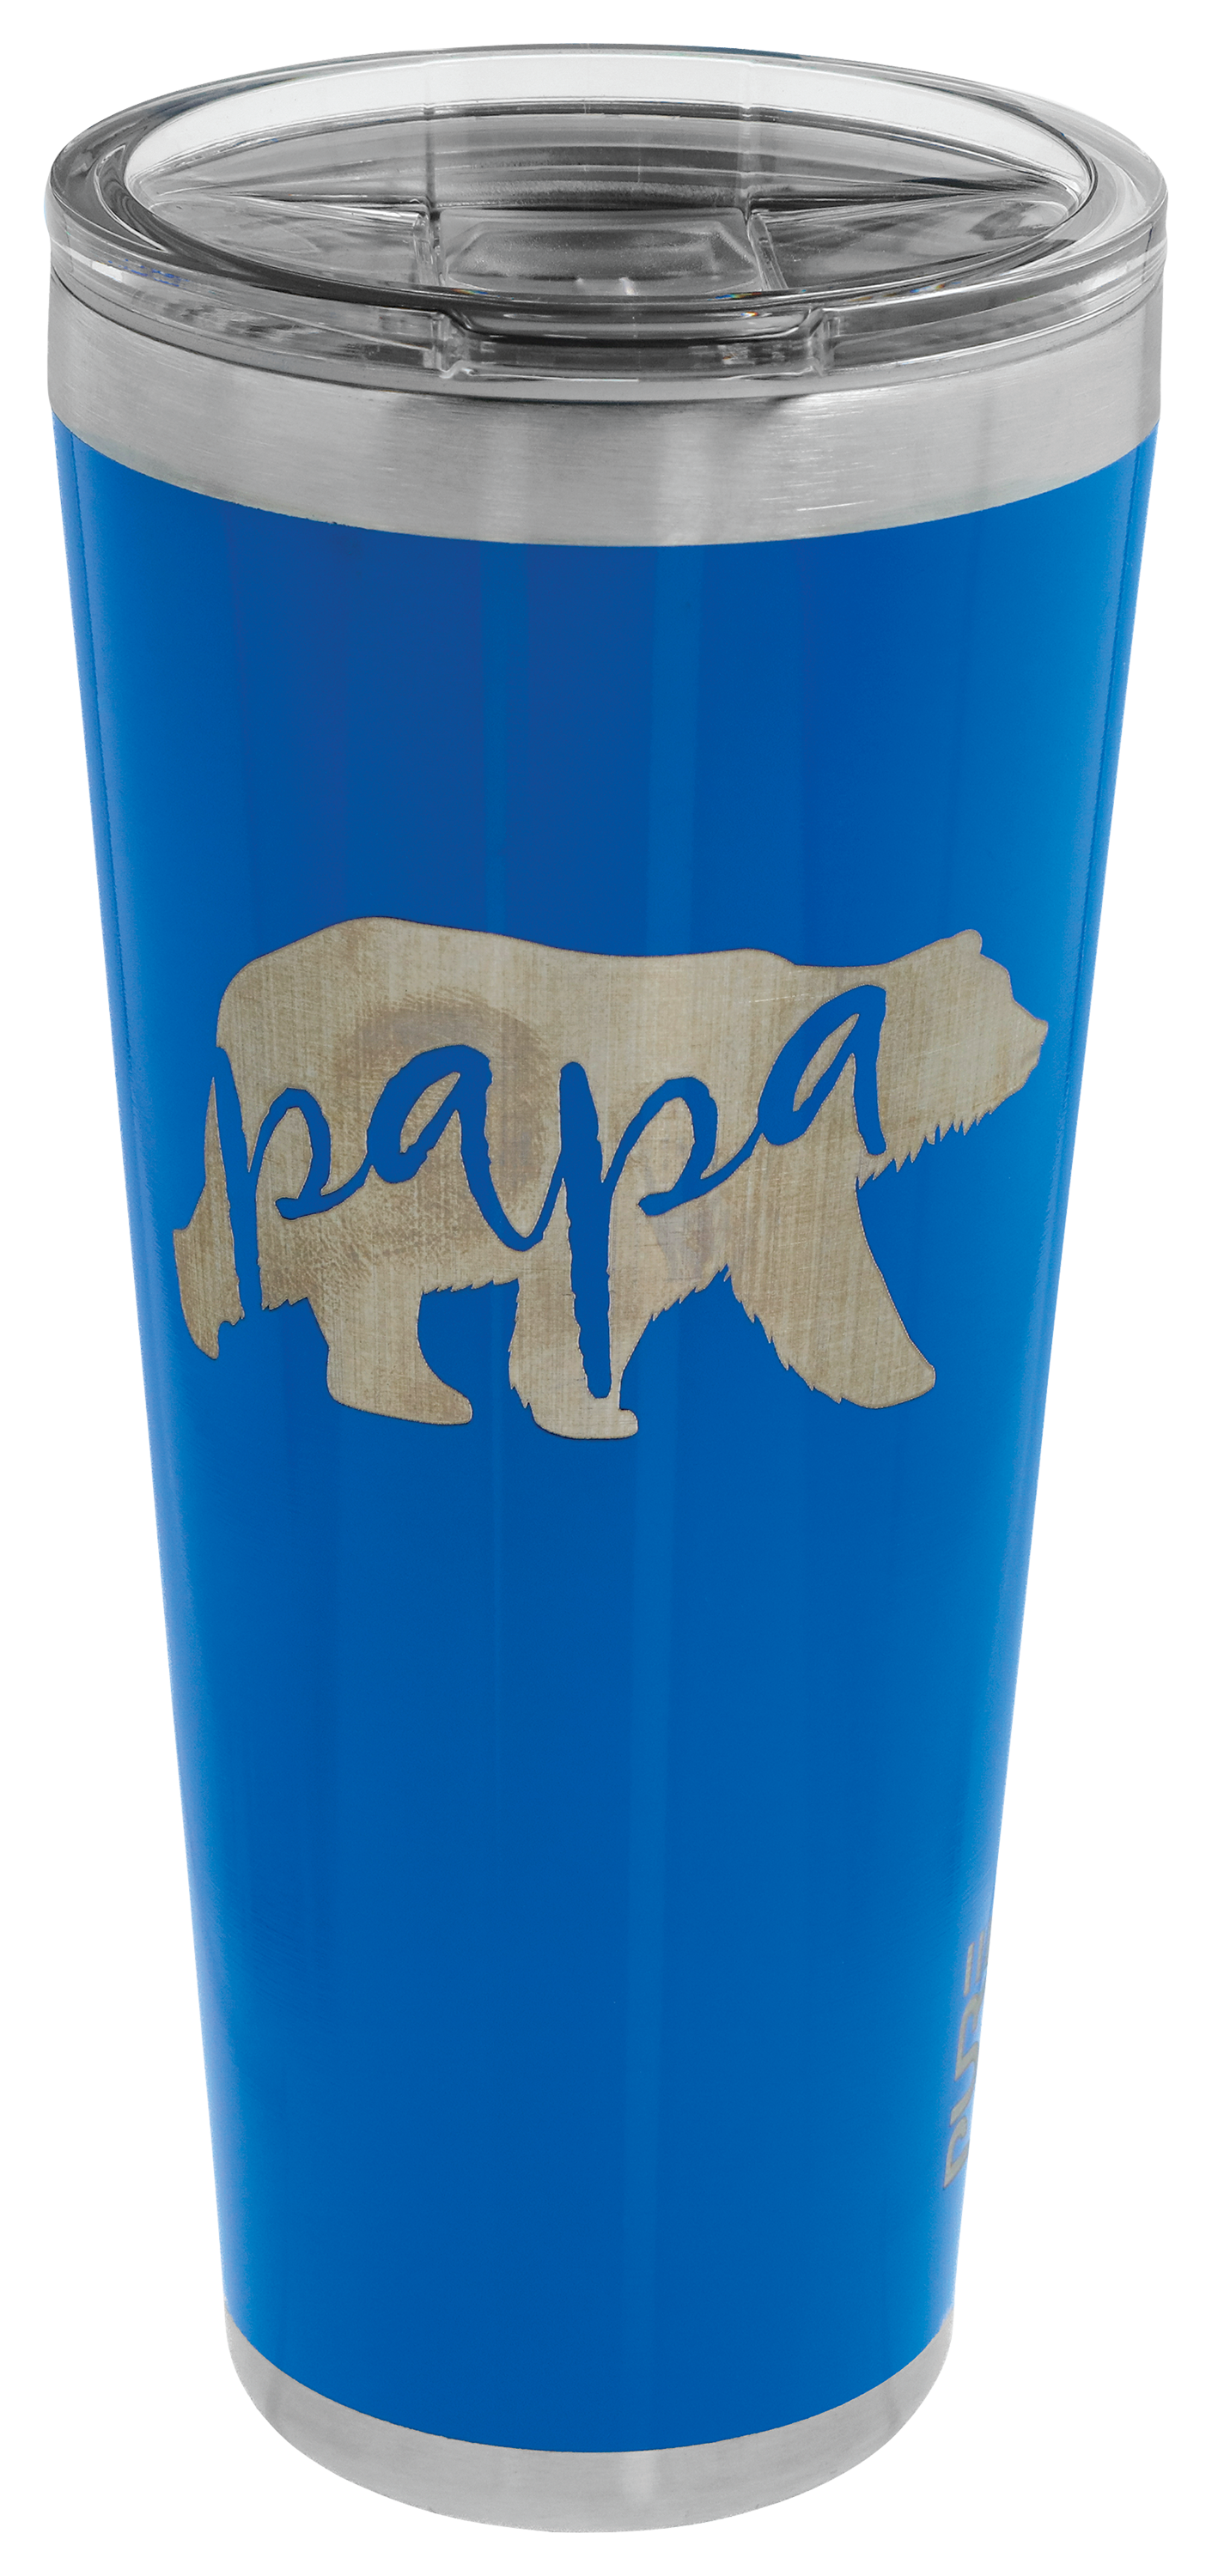 Bass Pro Shops - New Stanley Tumbler cups in store! Visit us at Bass Pro or  Cabela's to pick up your favourite colour!